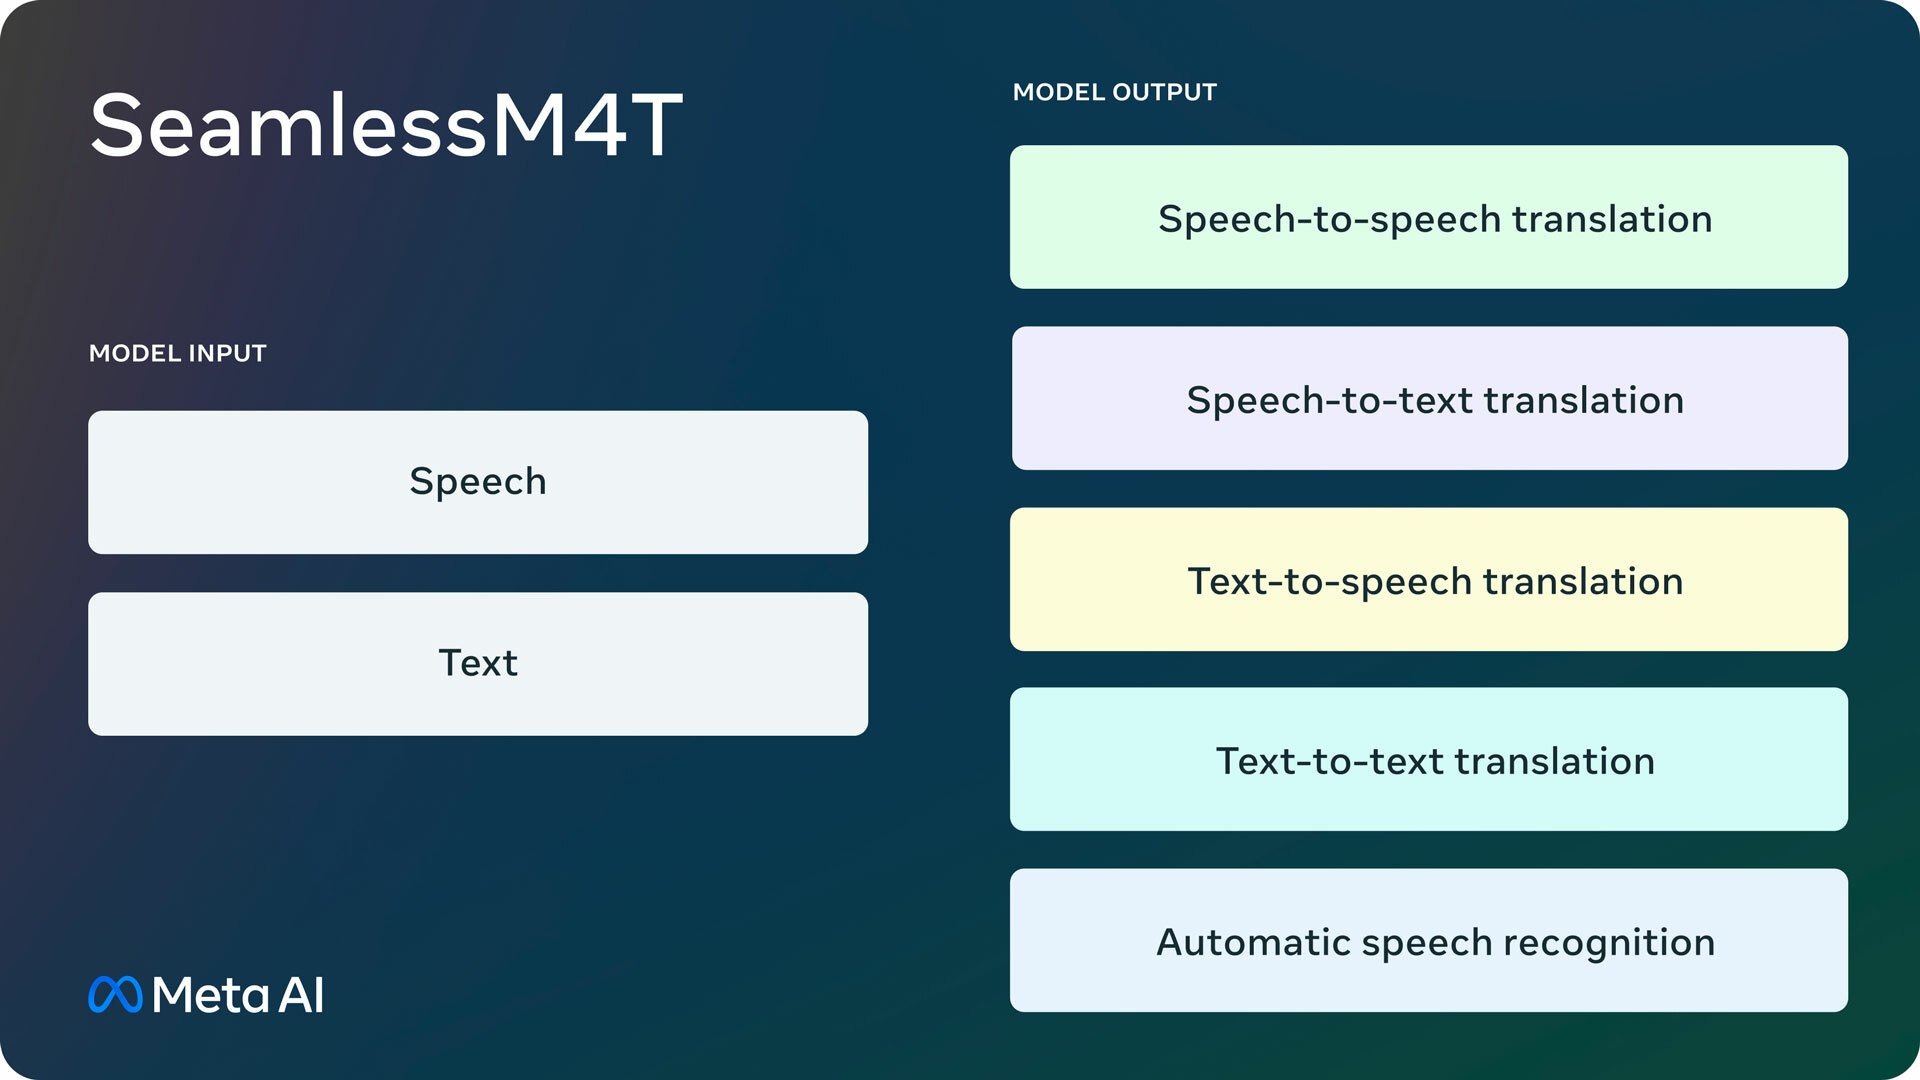 Meta graphic showing text to speech translation options for SeamlessM4T